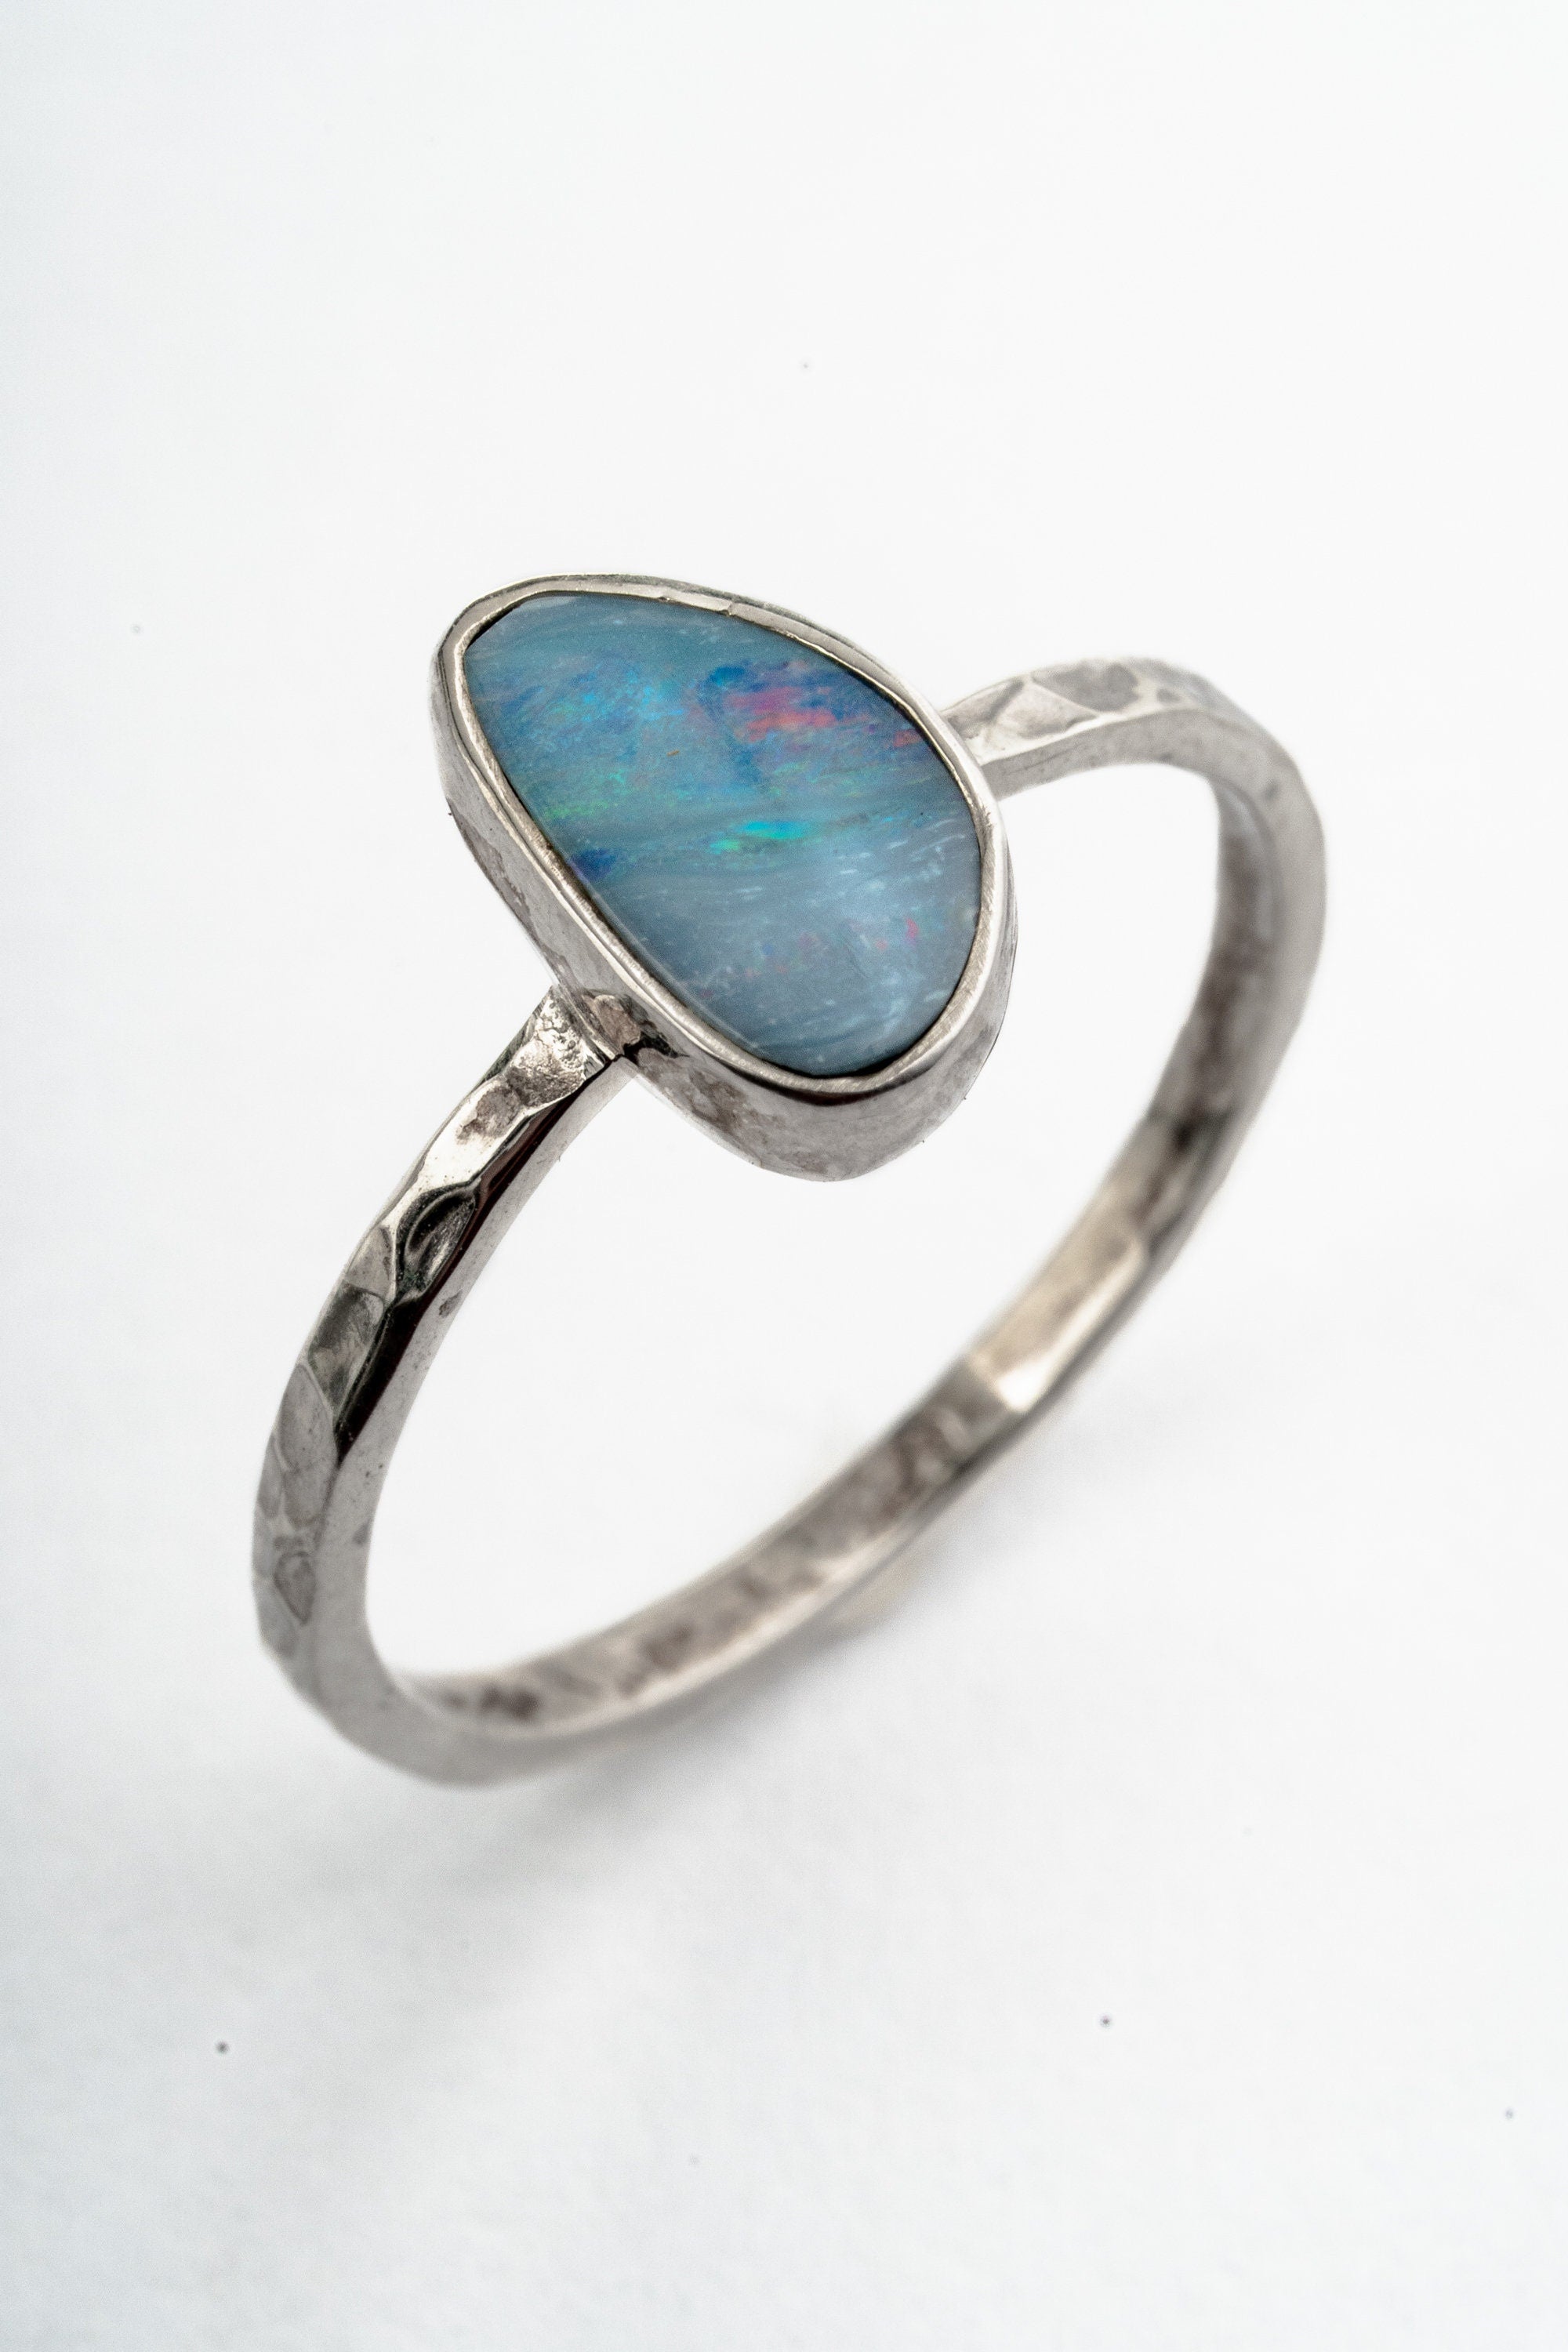 Precious Opal Doublet - Size - Size 5-8 US - Sterling Silver Ring